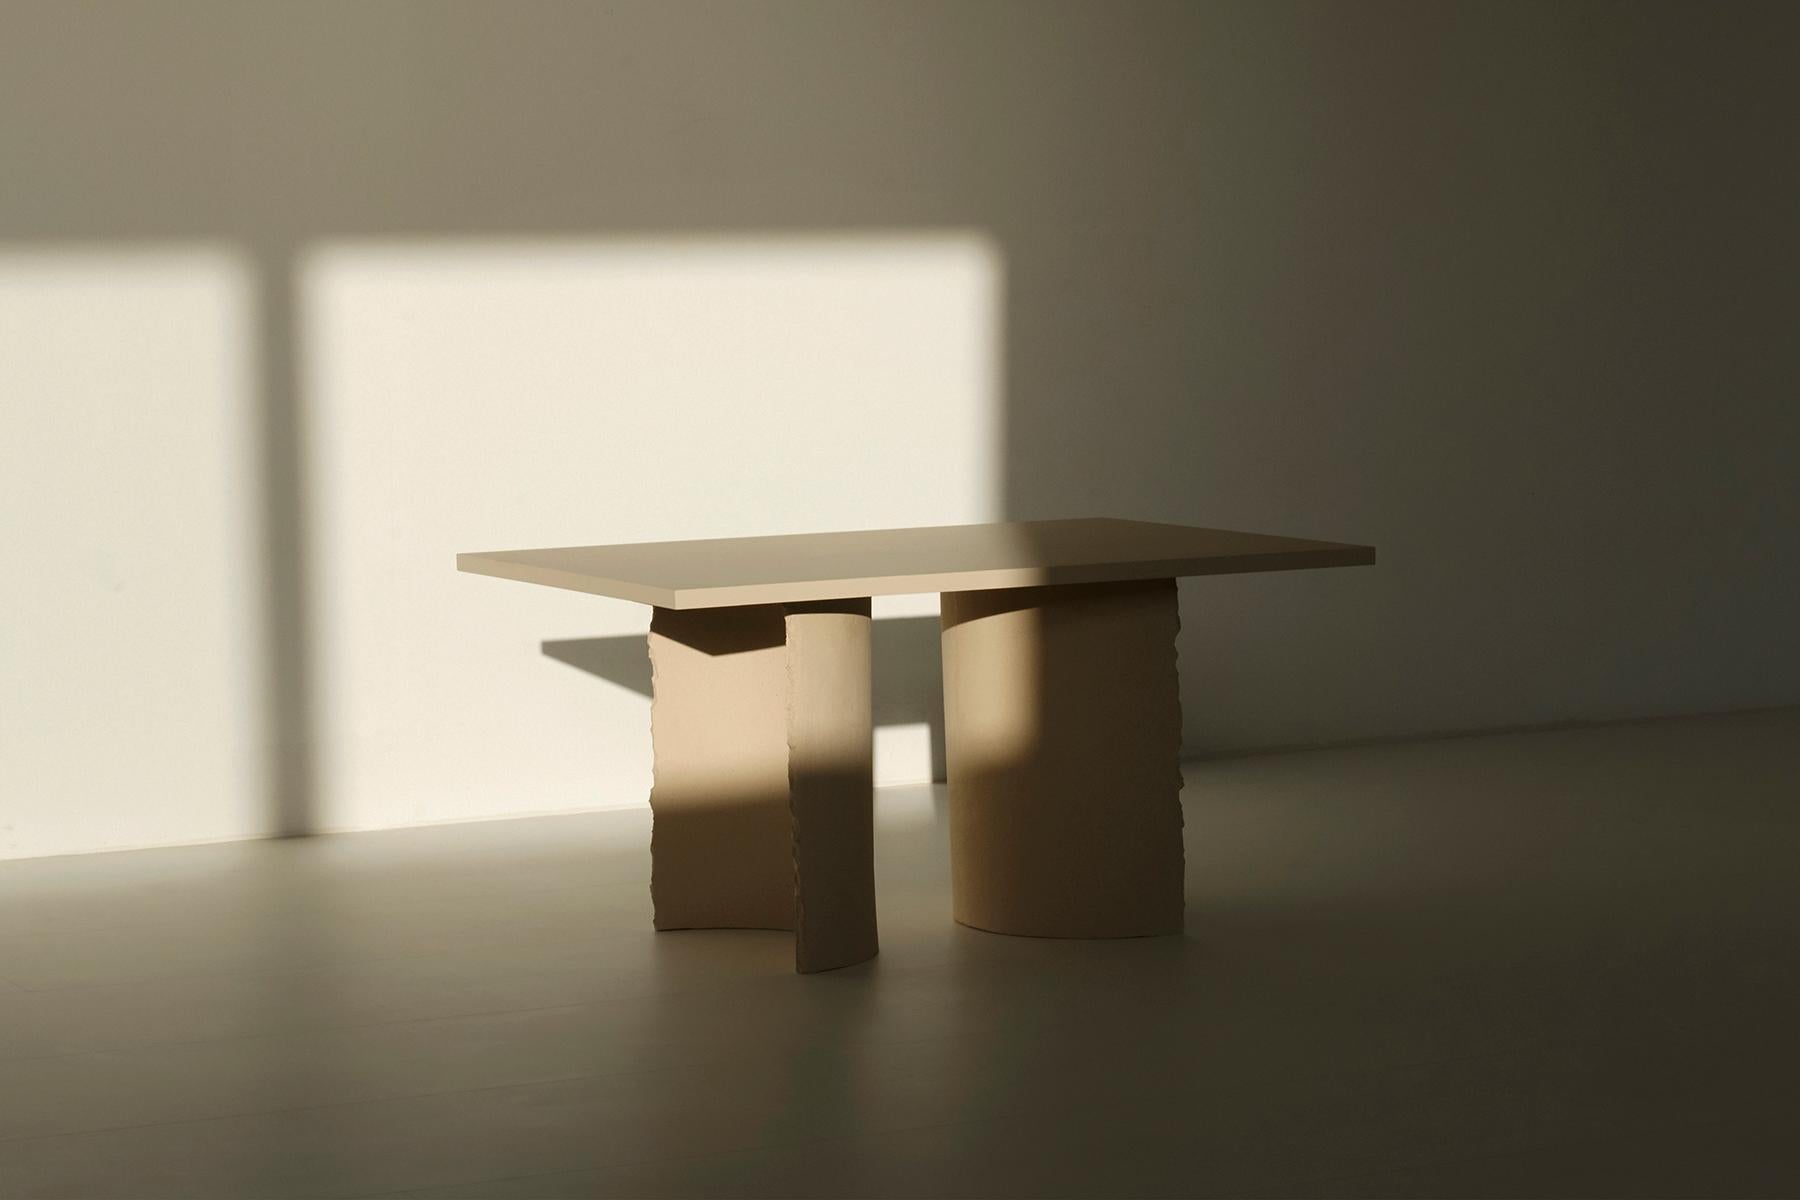 Hand-sculpted clay table by Sanna Völker
Common effort, side and coffee table
Dimensions: 50 x 50 x 46 cm.
Low tables inspired by the philosophy of the Danish sculptor Sonja Ferlov Mancoba (1911-1984).
- Please note that the bases of the tables